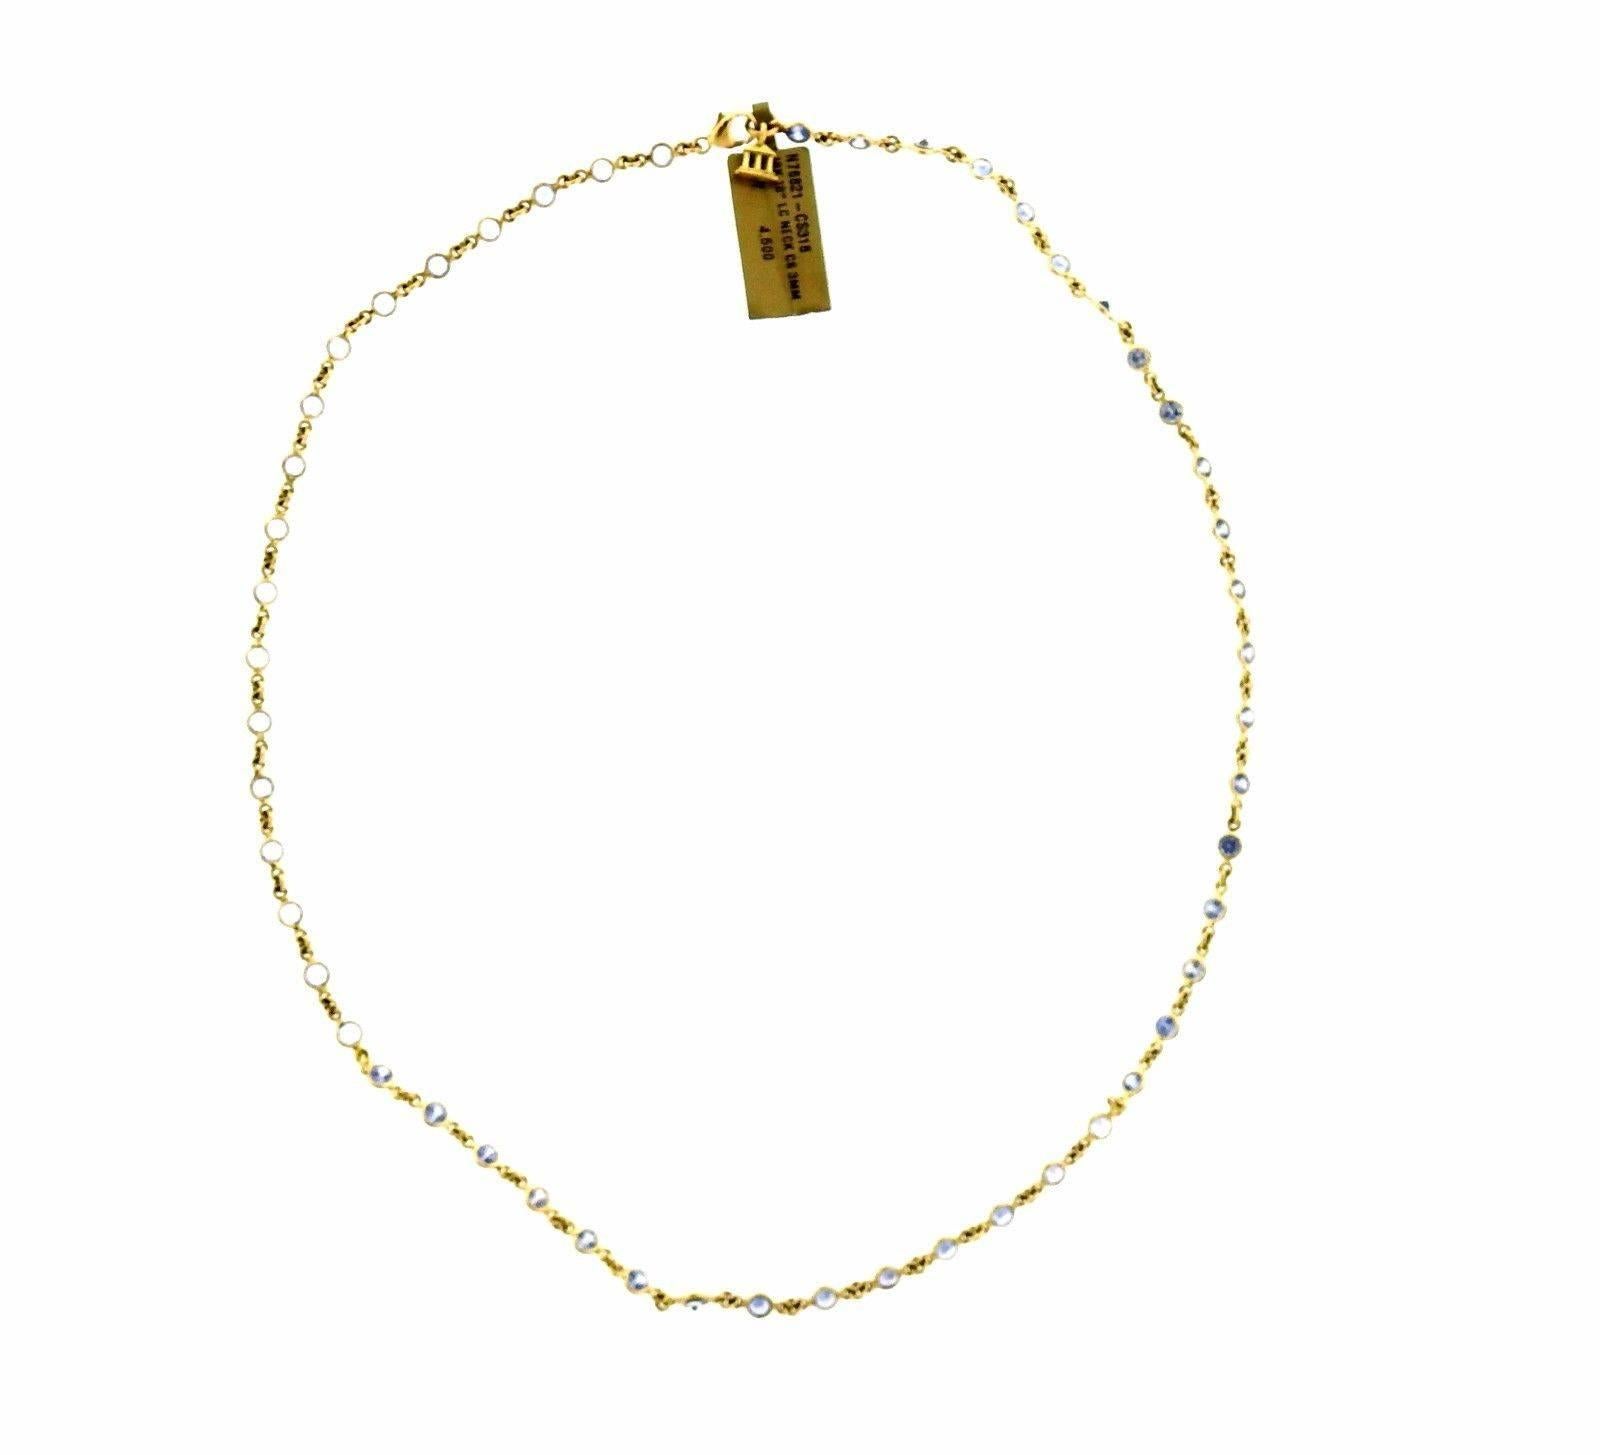 An 18k yellow gold necklace set with blue sapphires.  The necklace is 17.5